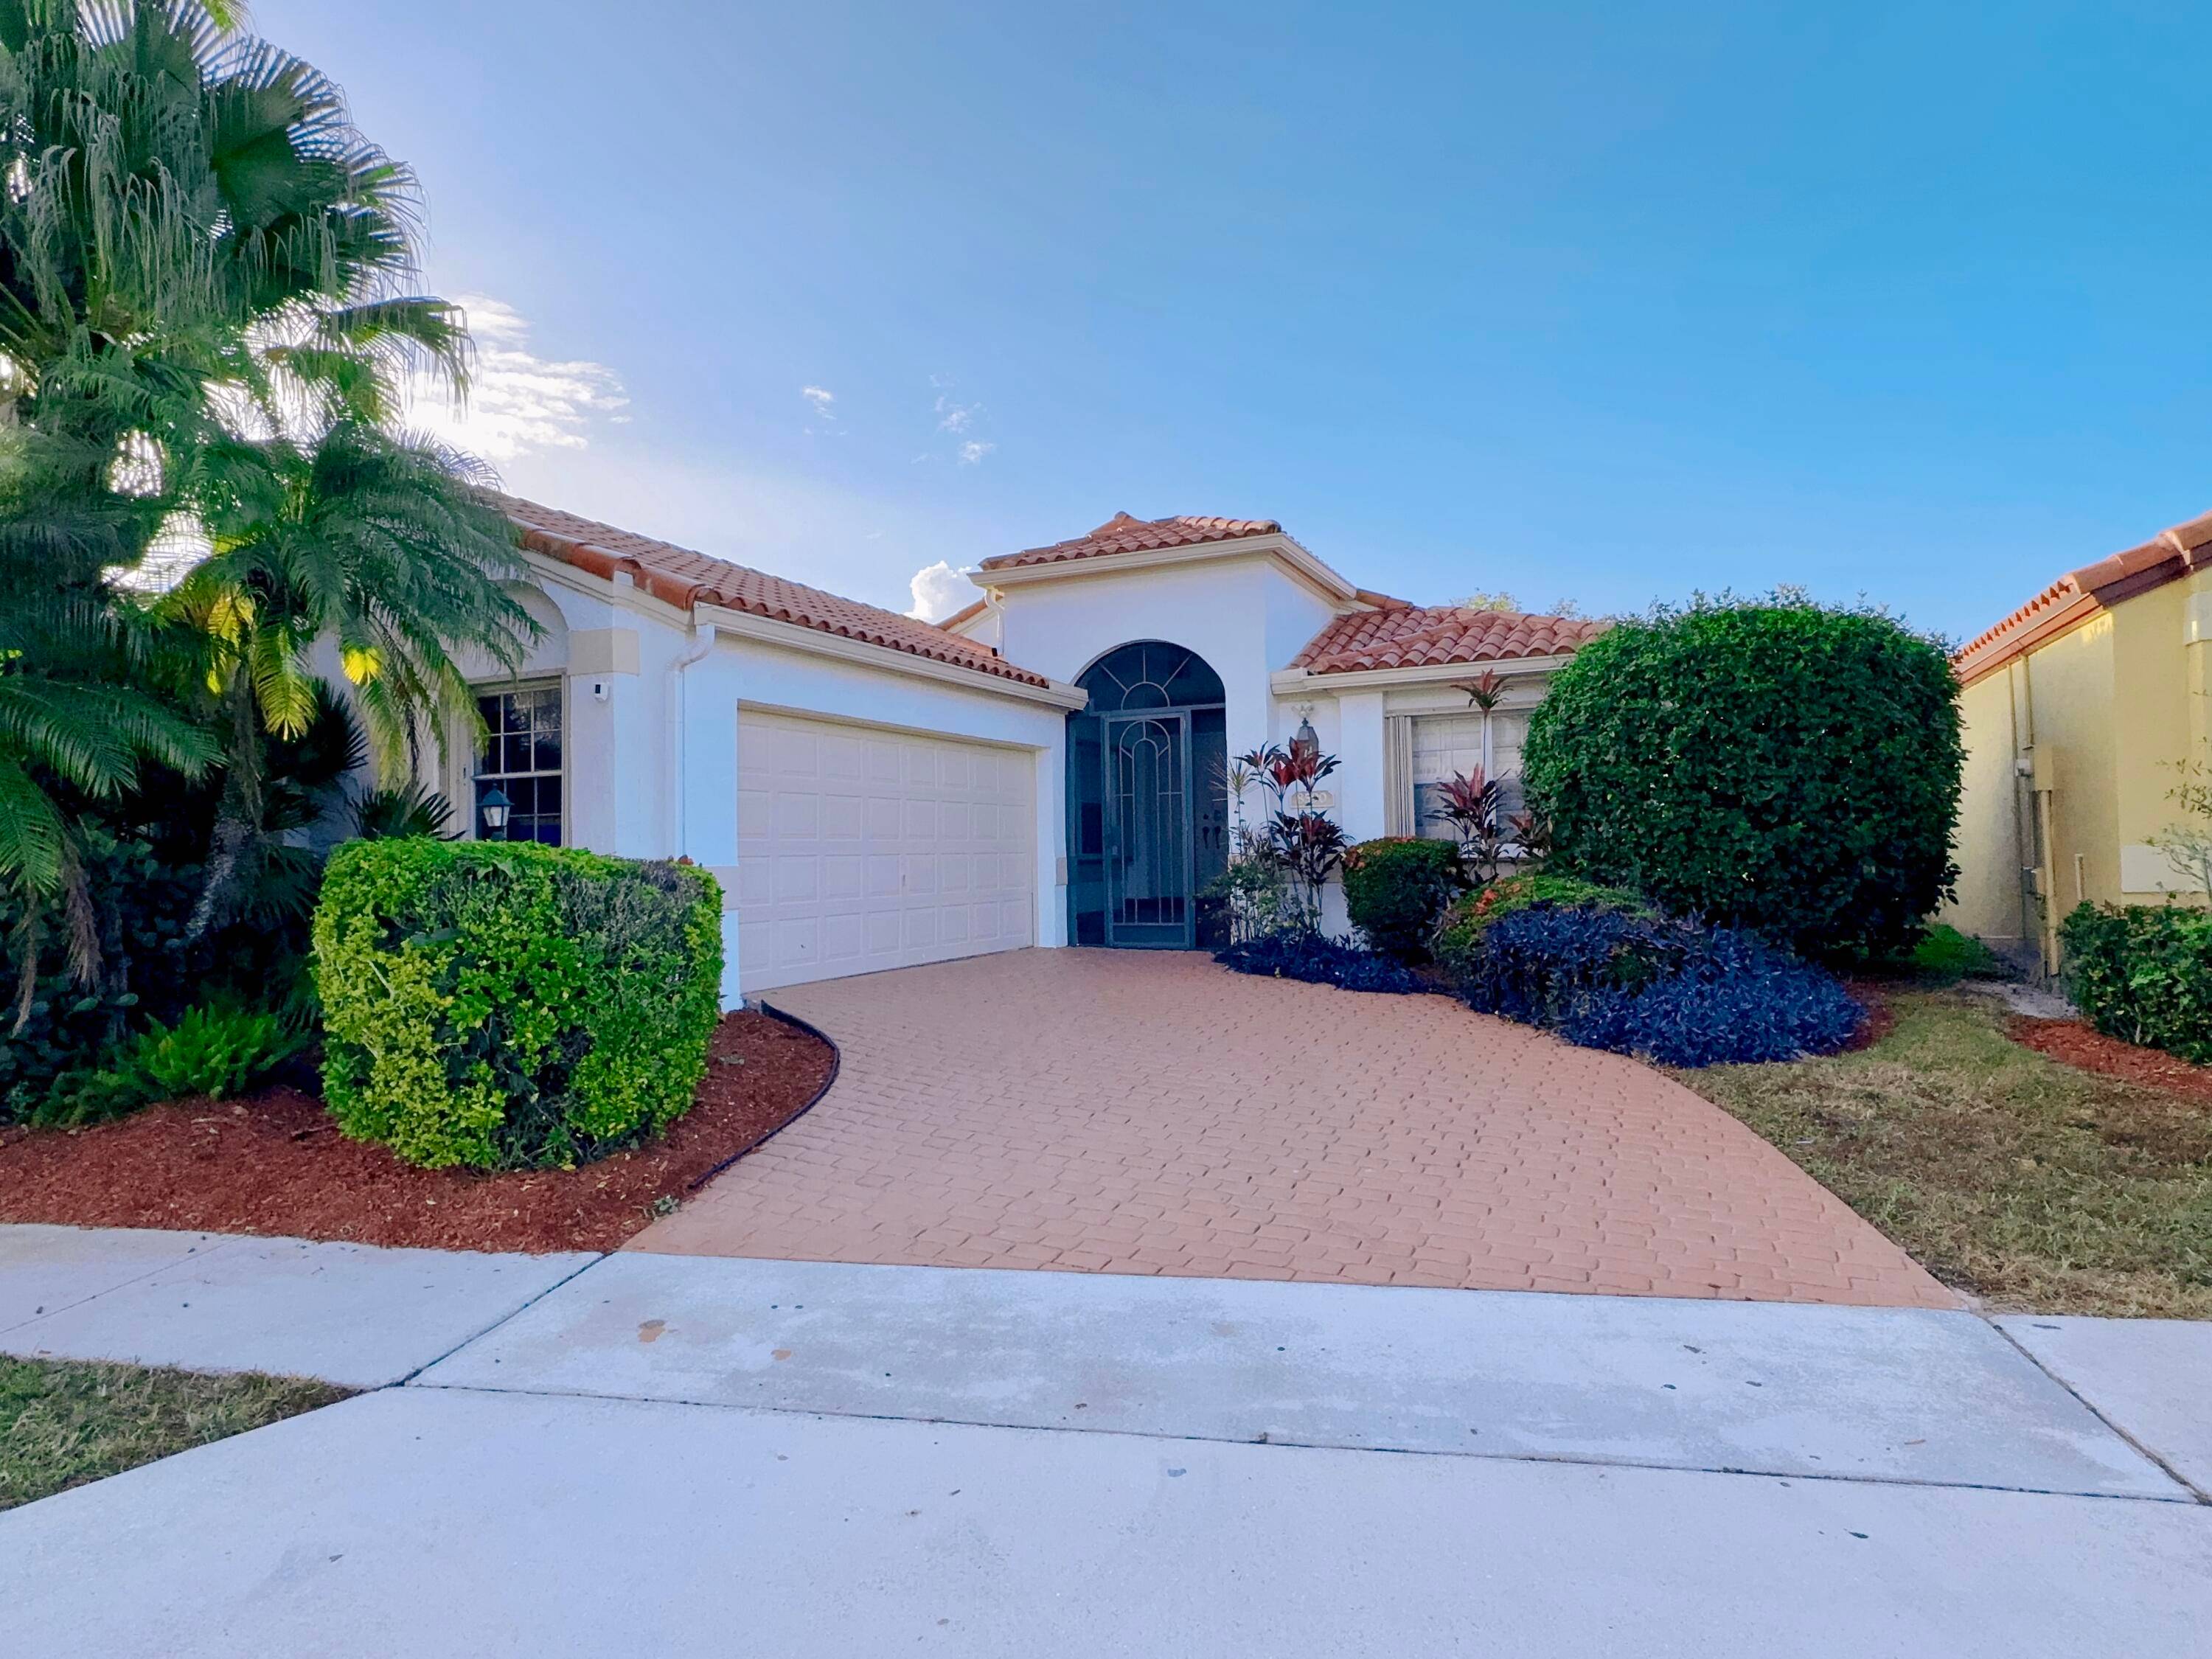 This Mediterranean Style home is centrally located in Boca with 2 brand new bathrooms with high end fixtures and cabinets.